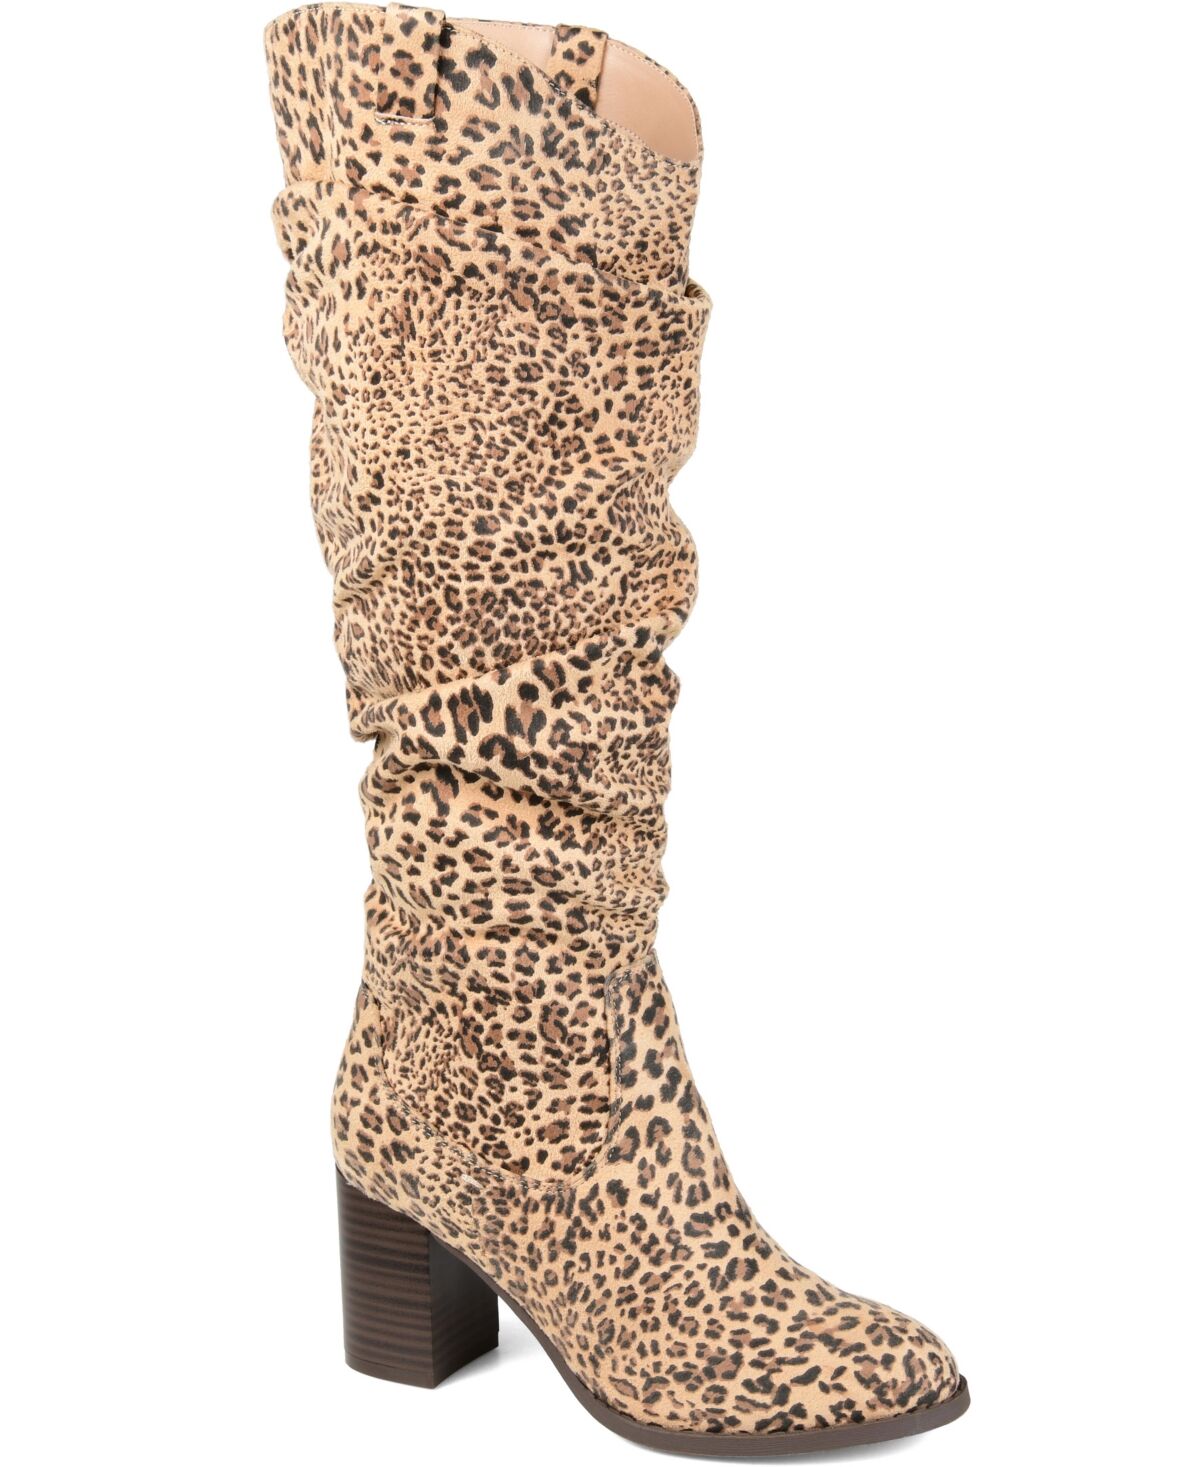 Journee Collection Women's Aneil Boots - Leopard